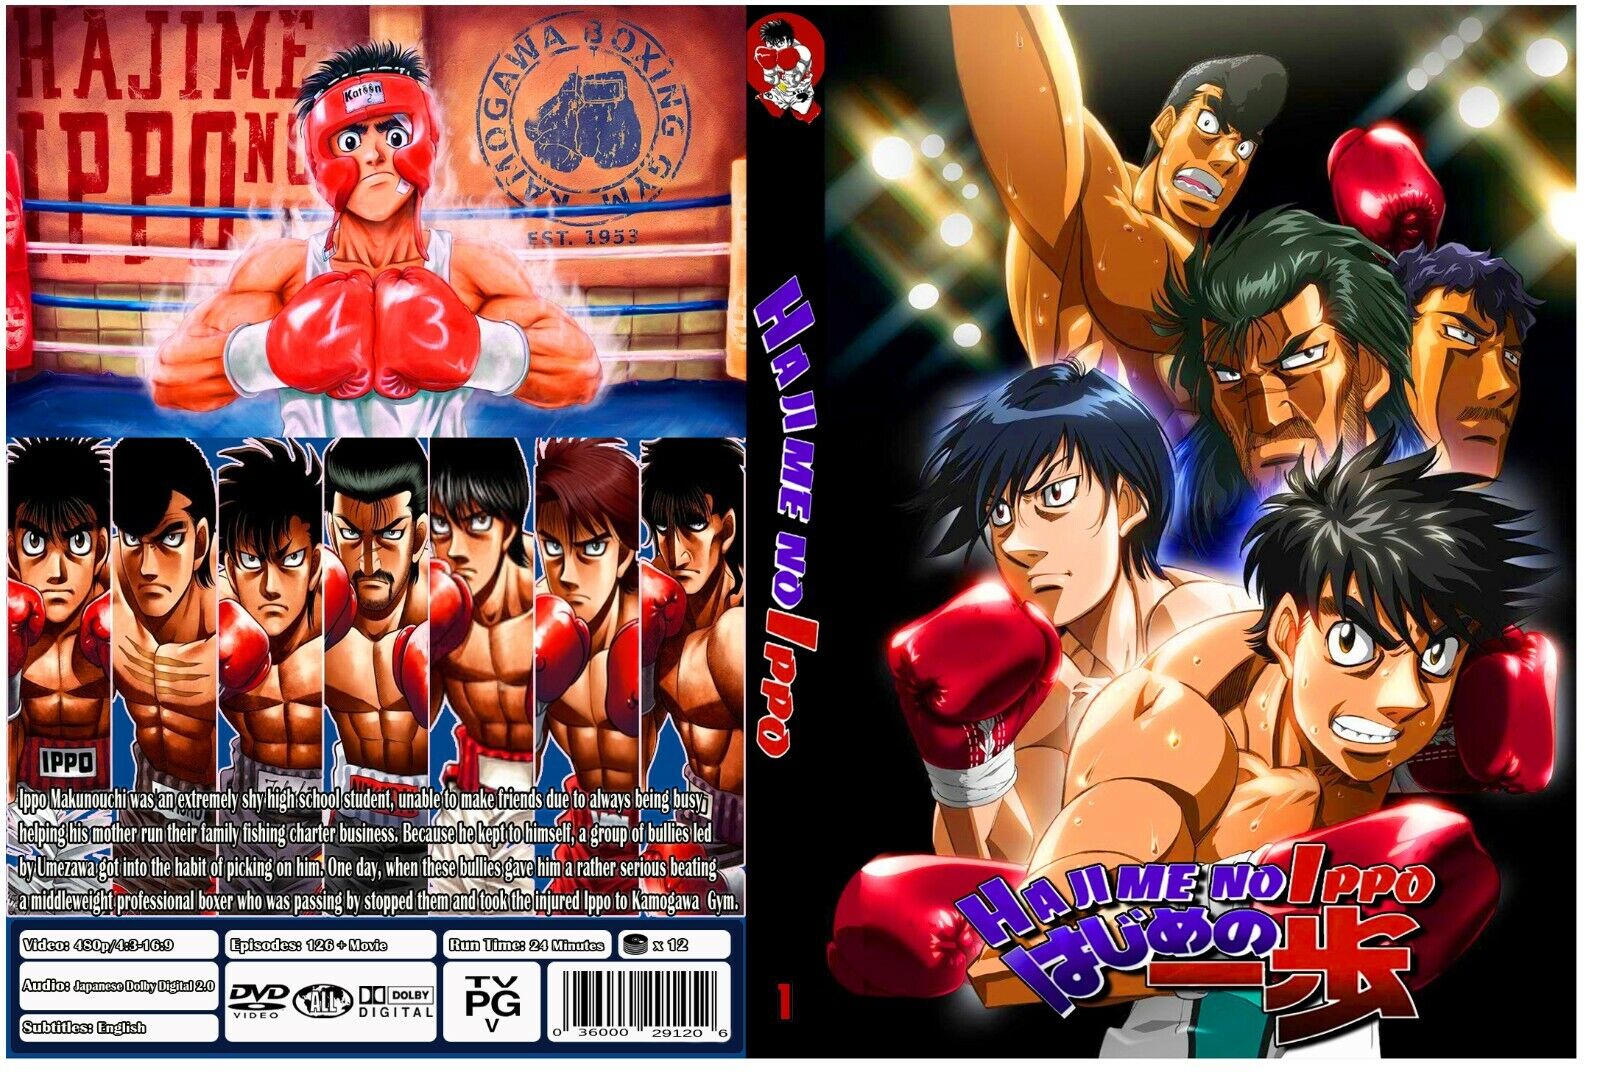 aldrig Luscious Fugtighed Hajime No Ippo Complete Series Episodes 126 + Movie Champion Road for Sale  - Fleetwoodmac.net